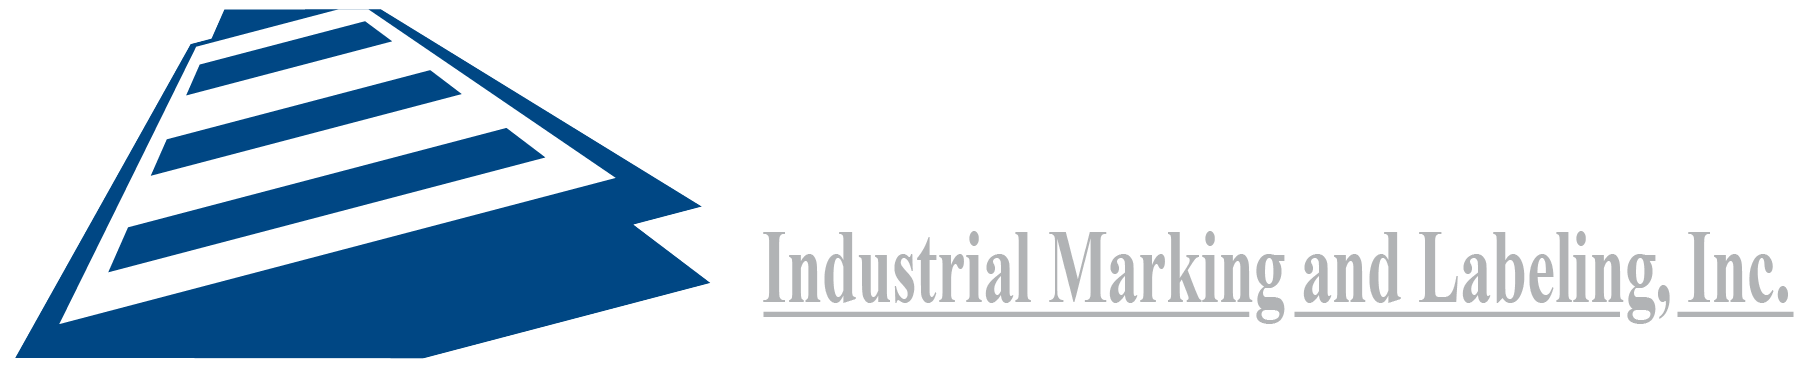 PALCO Industrial Marking and Labeling, Inc.